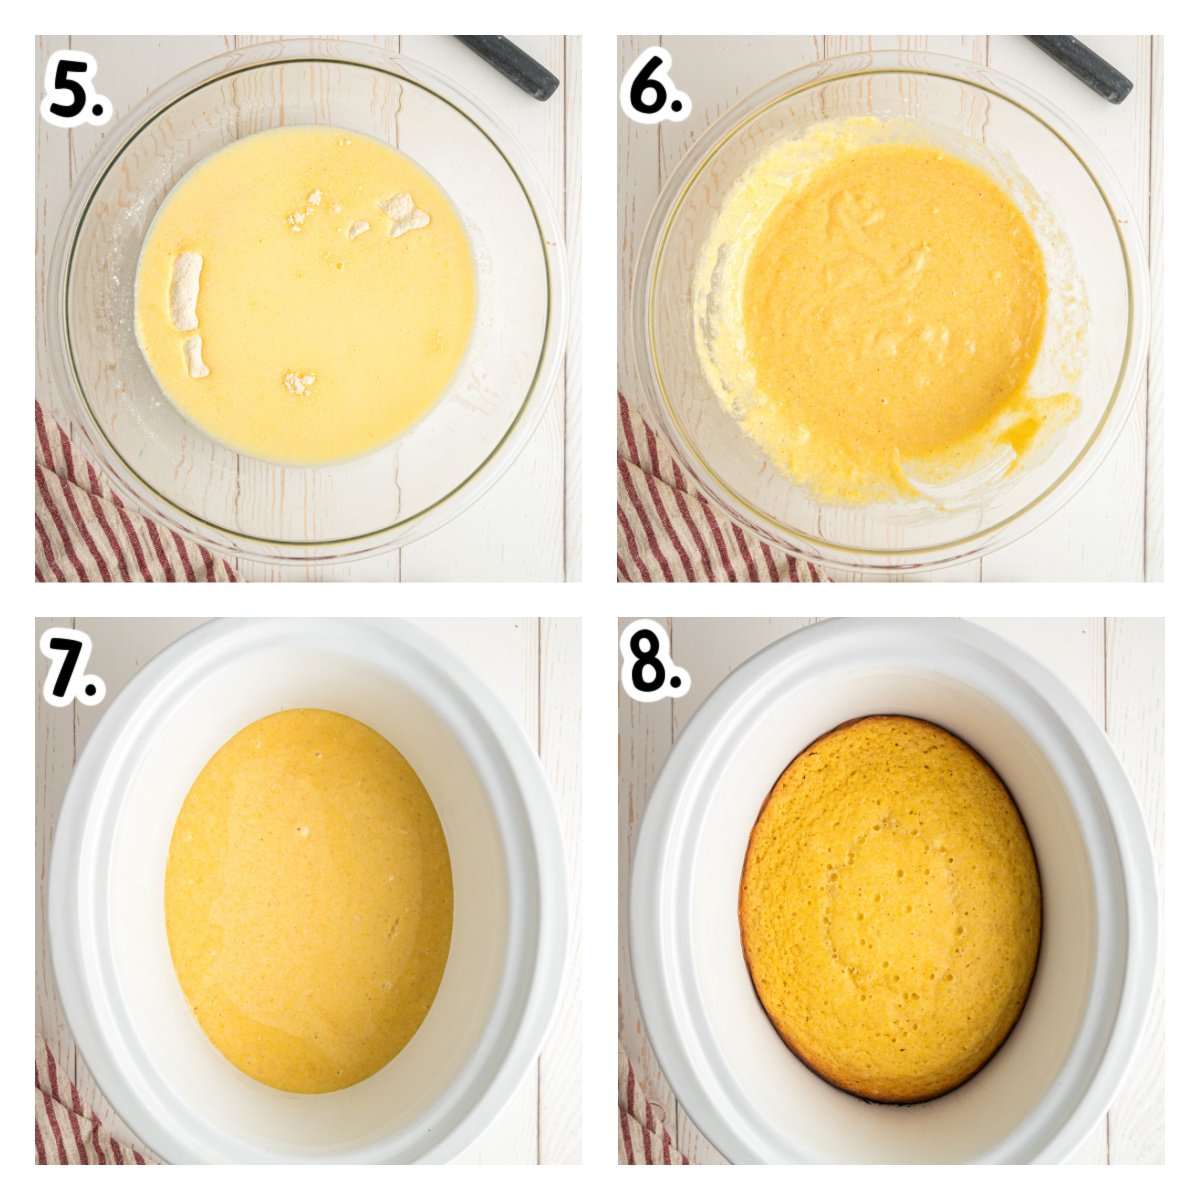 Four images showing how to add batter to slow cooker to make cornbread.